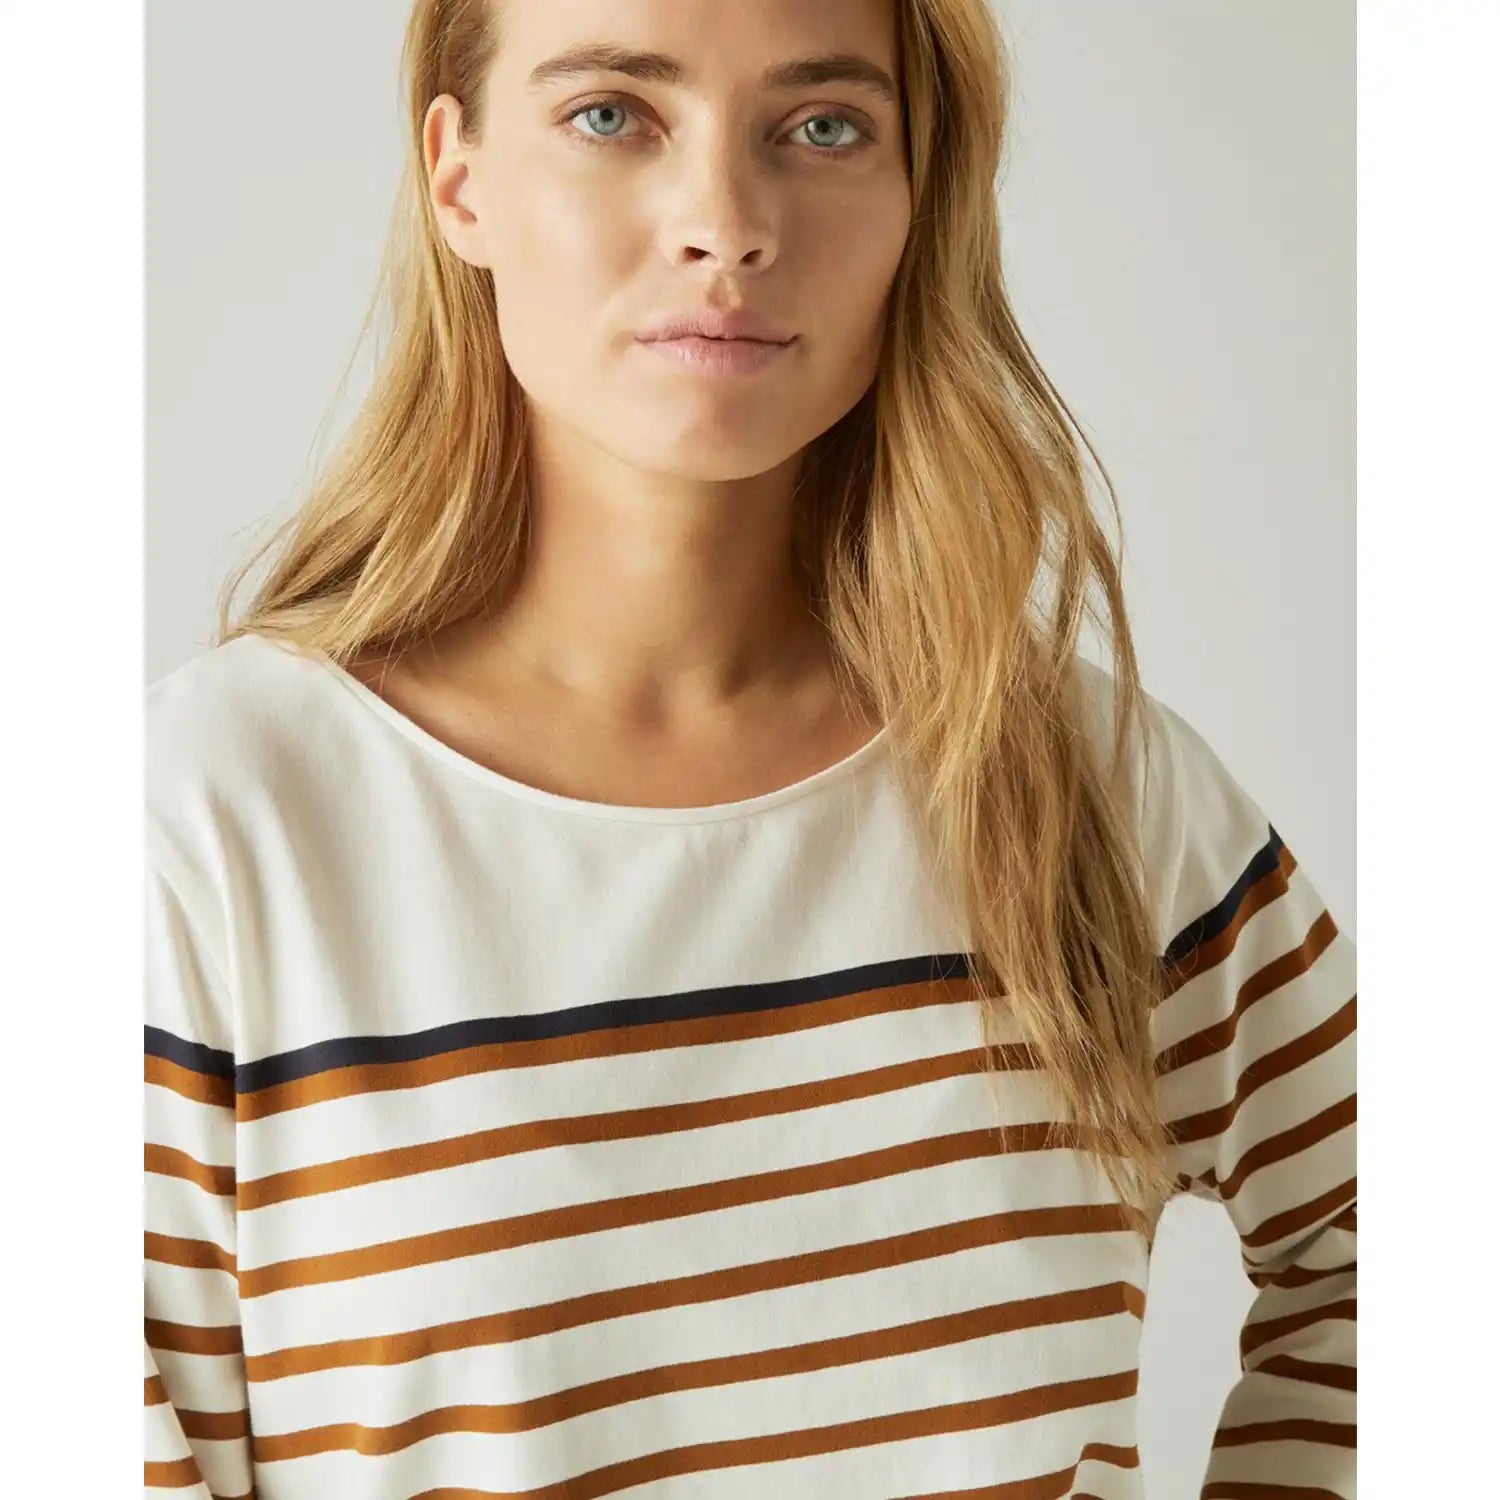 Couchel Stripes Essential T-Shirt - White 2 Shaws Department Stores